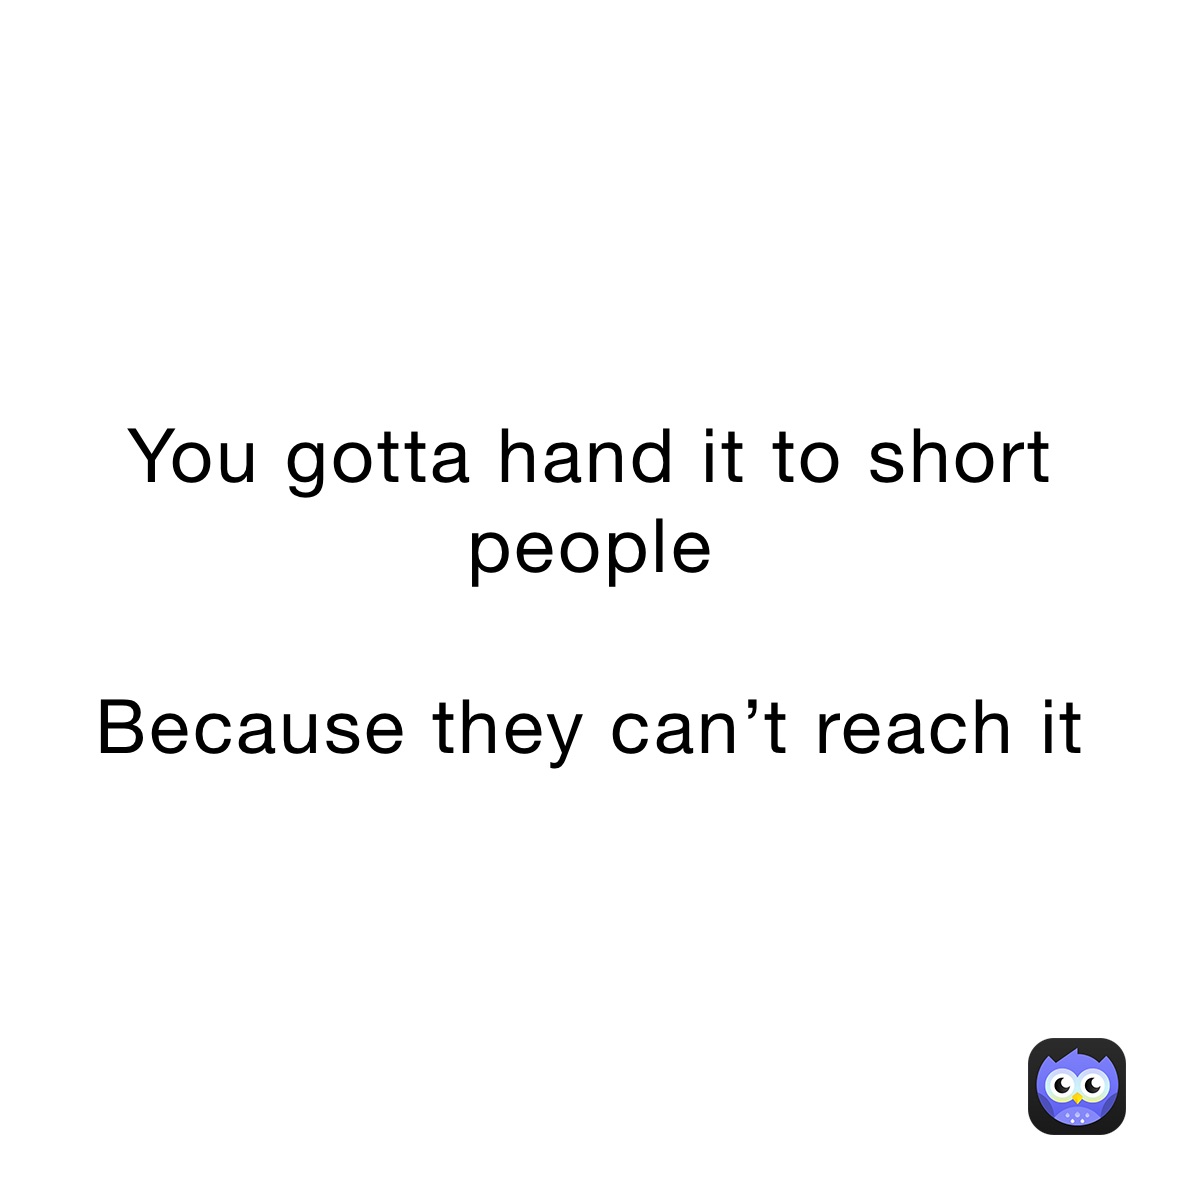 You gotta hand it to short people 

Because they can’t reach it 